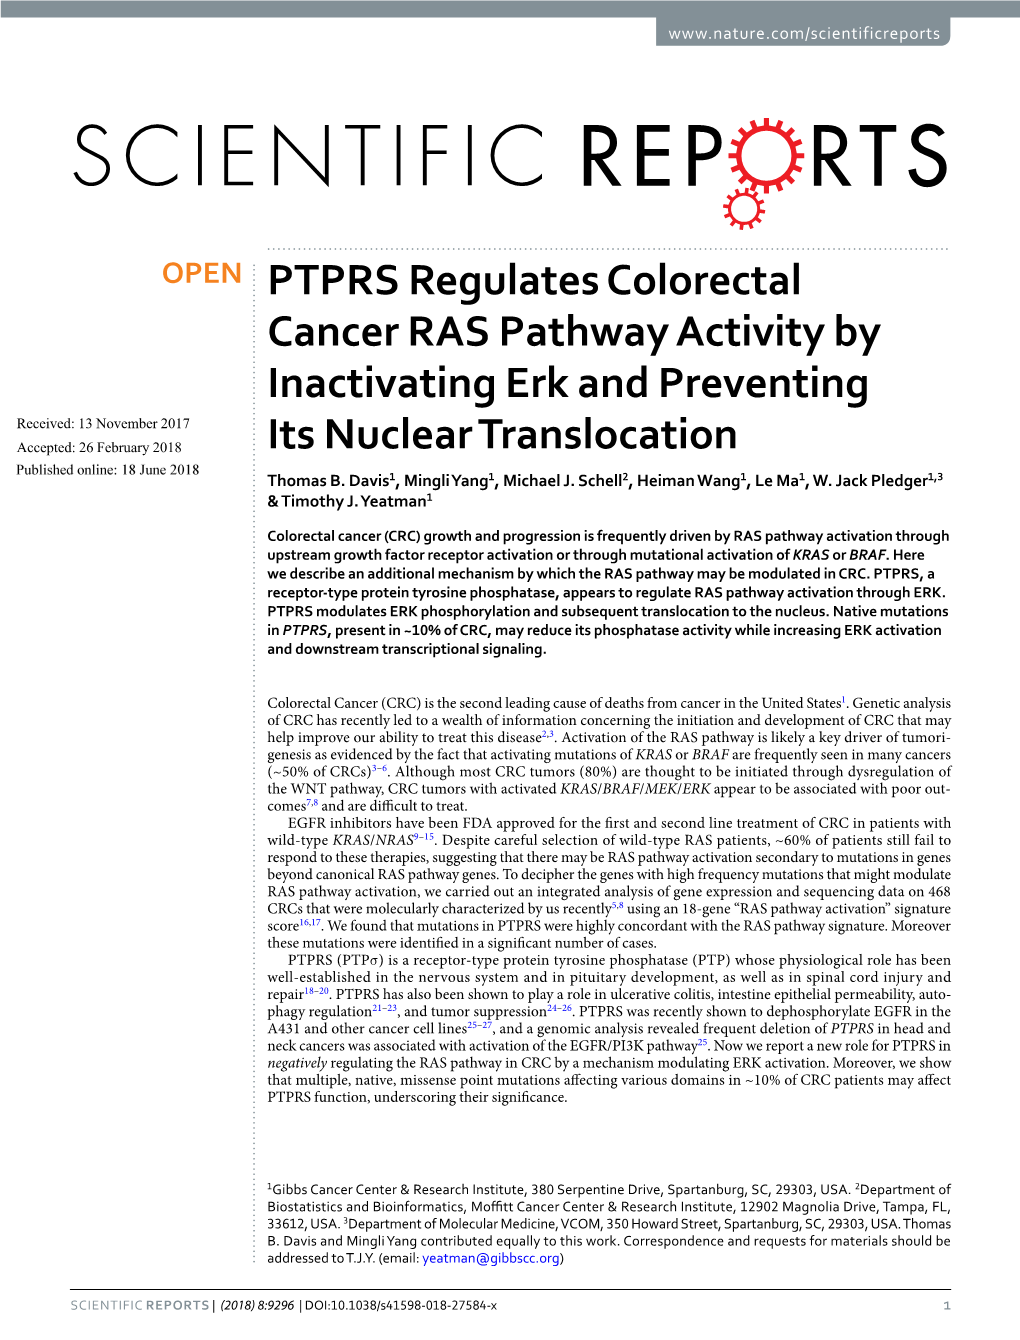 PTPRS Regulates Colorectal Cancer RAS Pathway Activity By